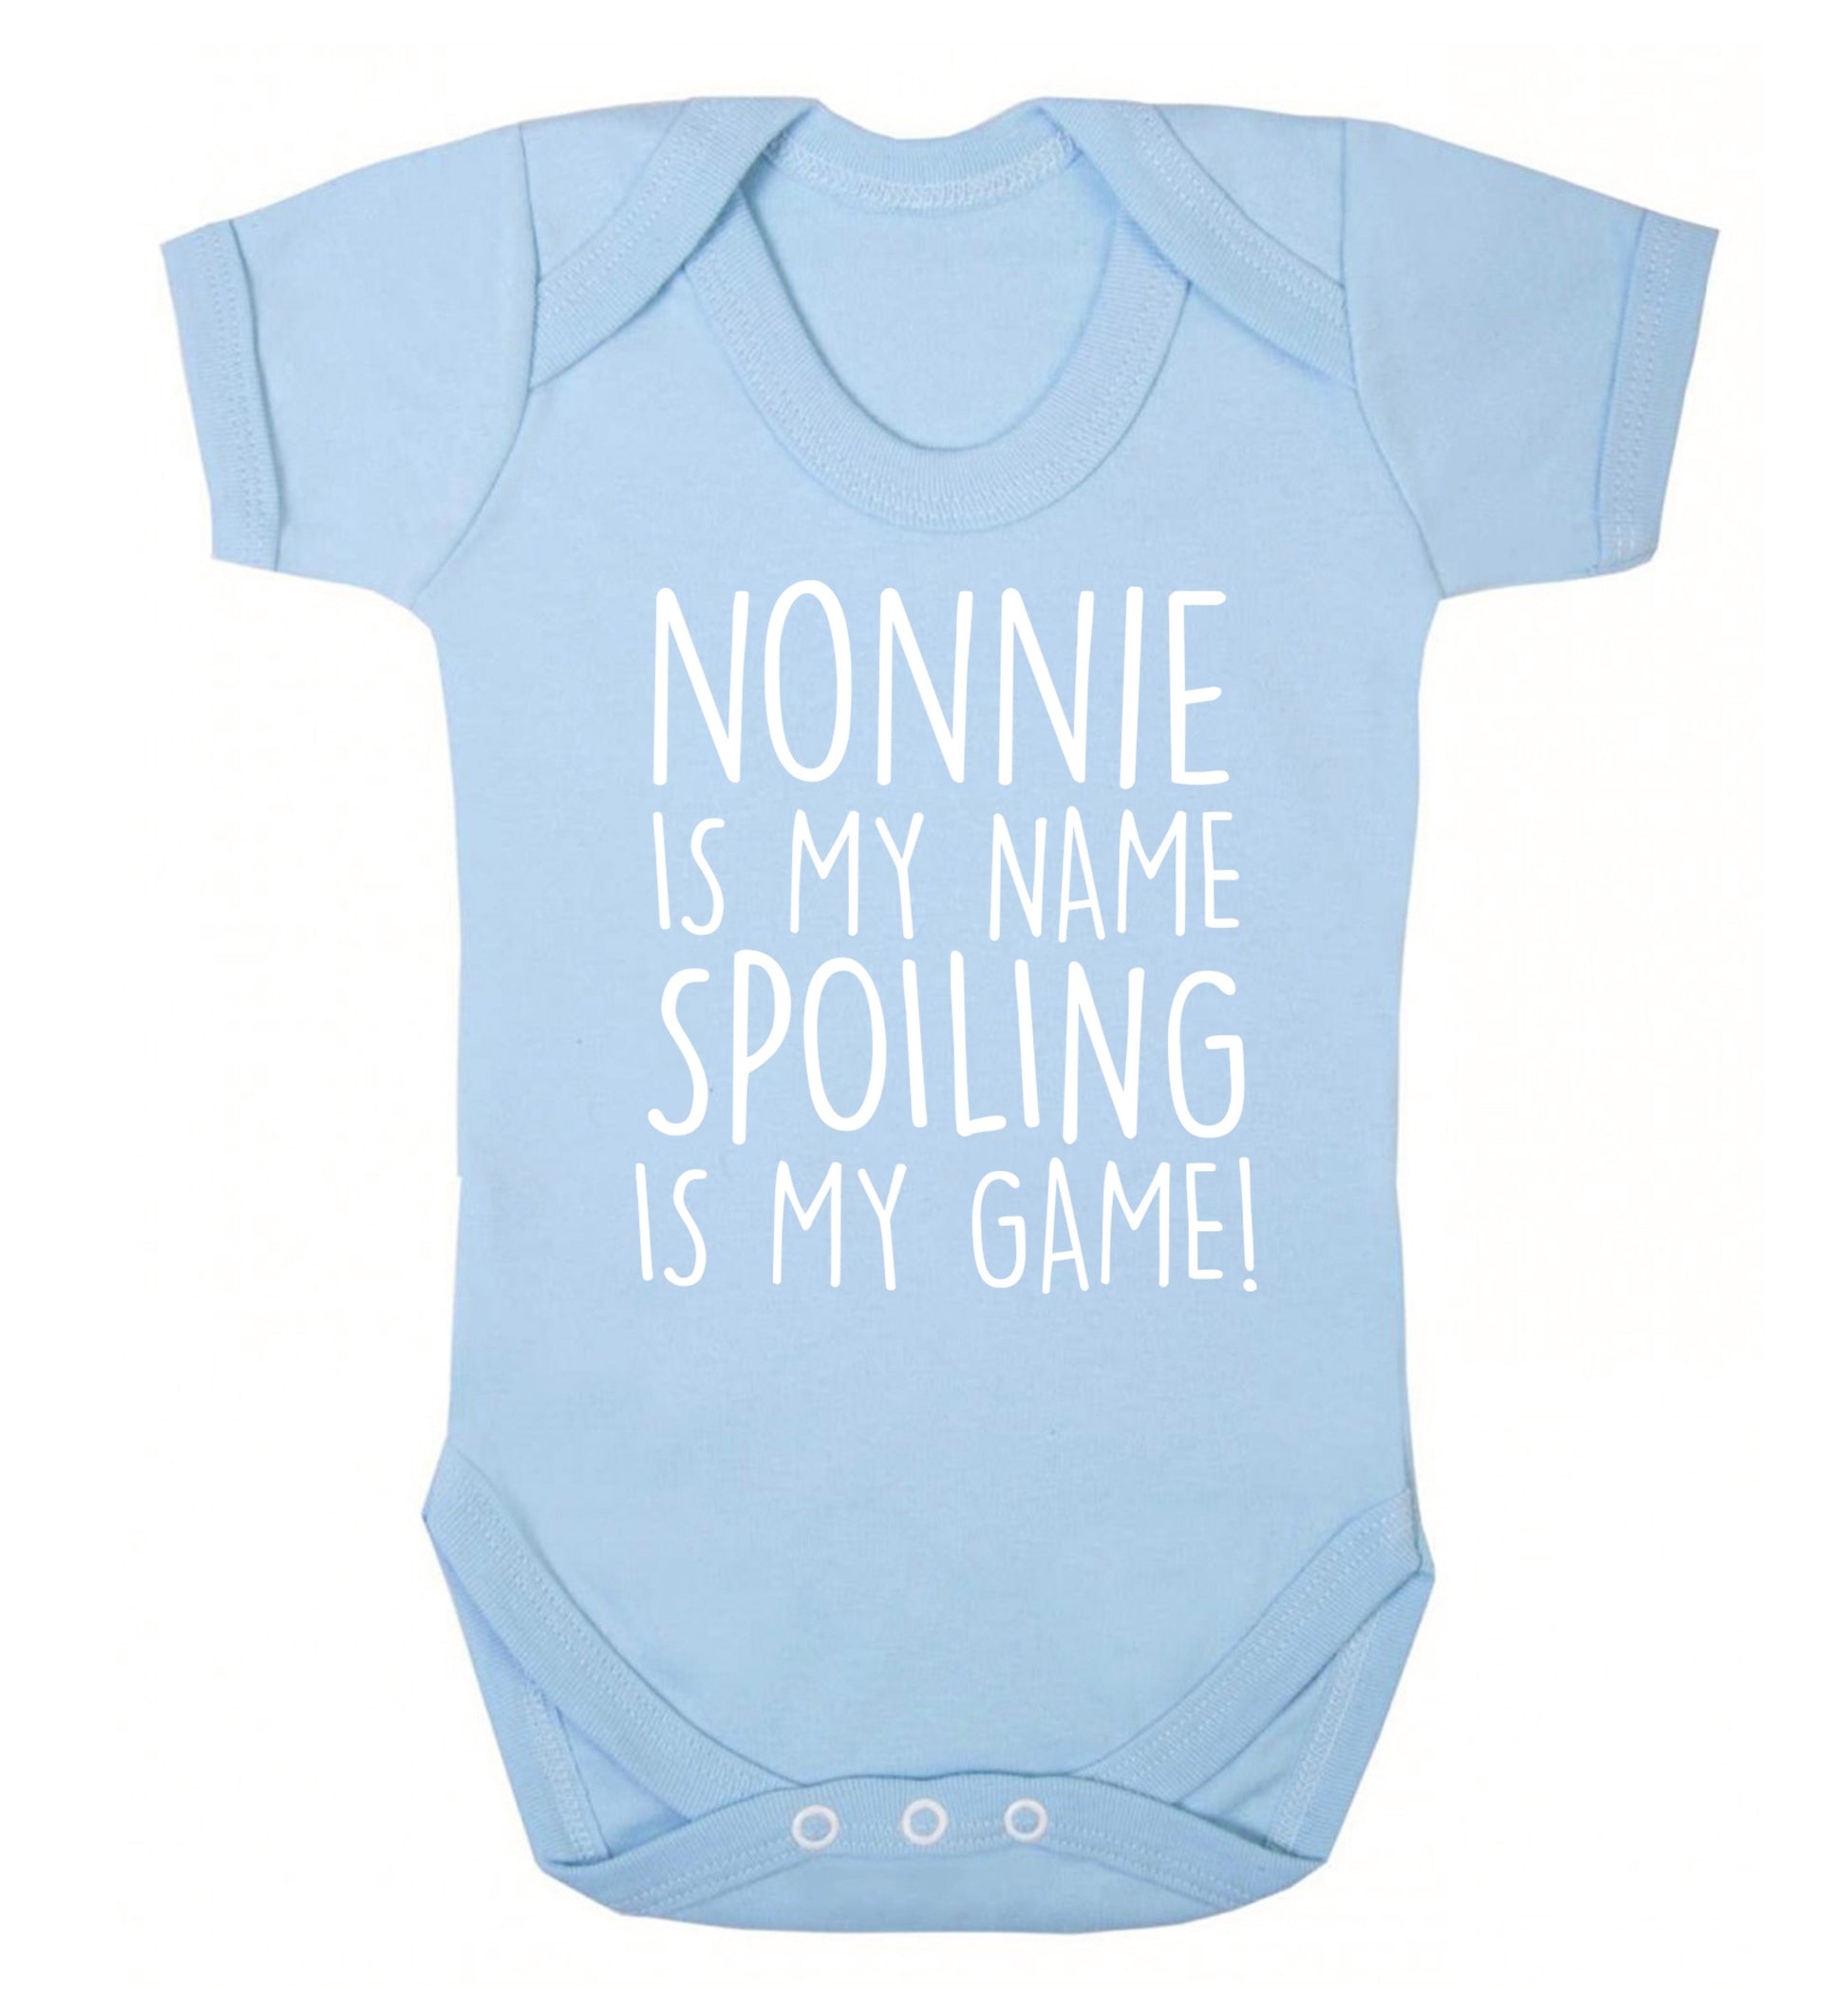 Nonnie is my name, spoiling is my game Baby Vest pale blue 18-24 months